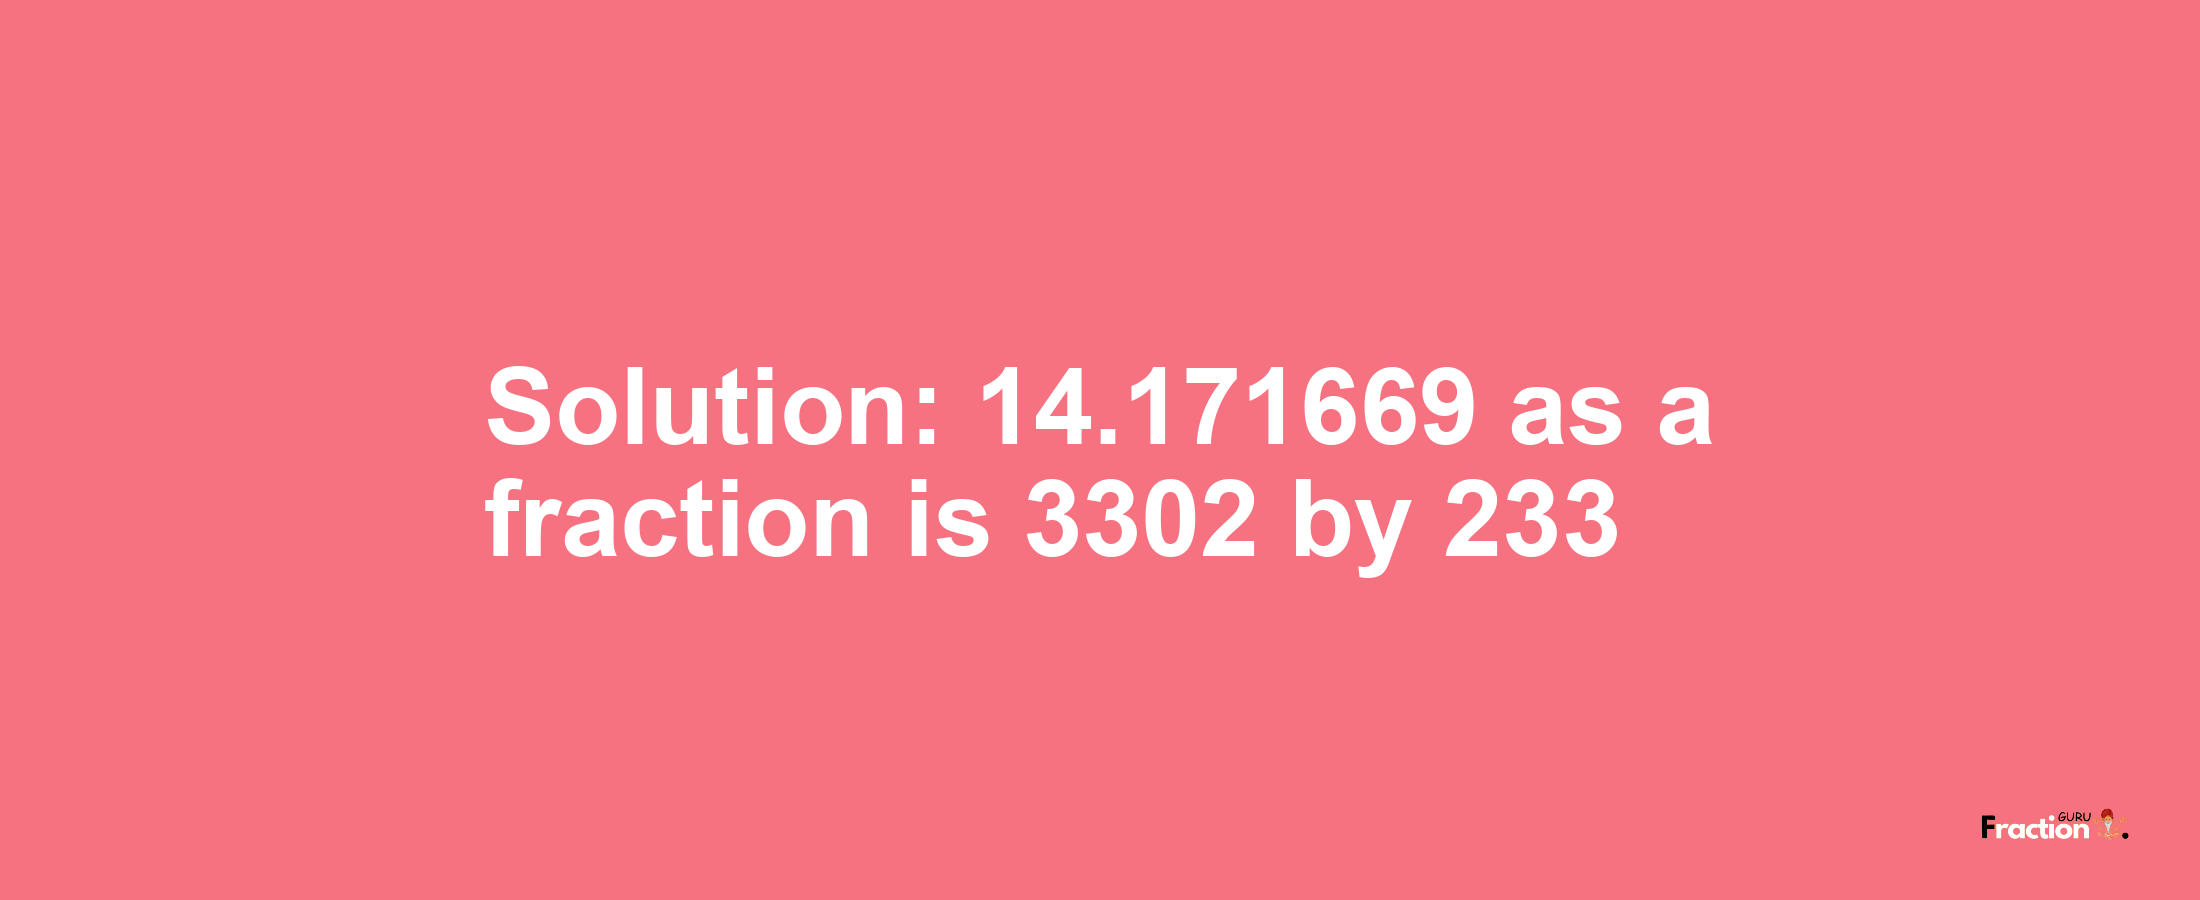 Solution:14.171669 as a fraction is 3302/233